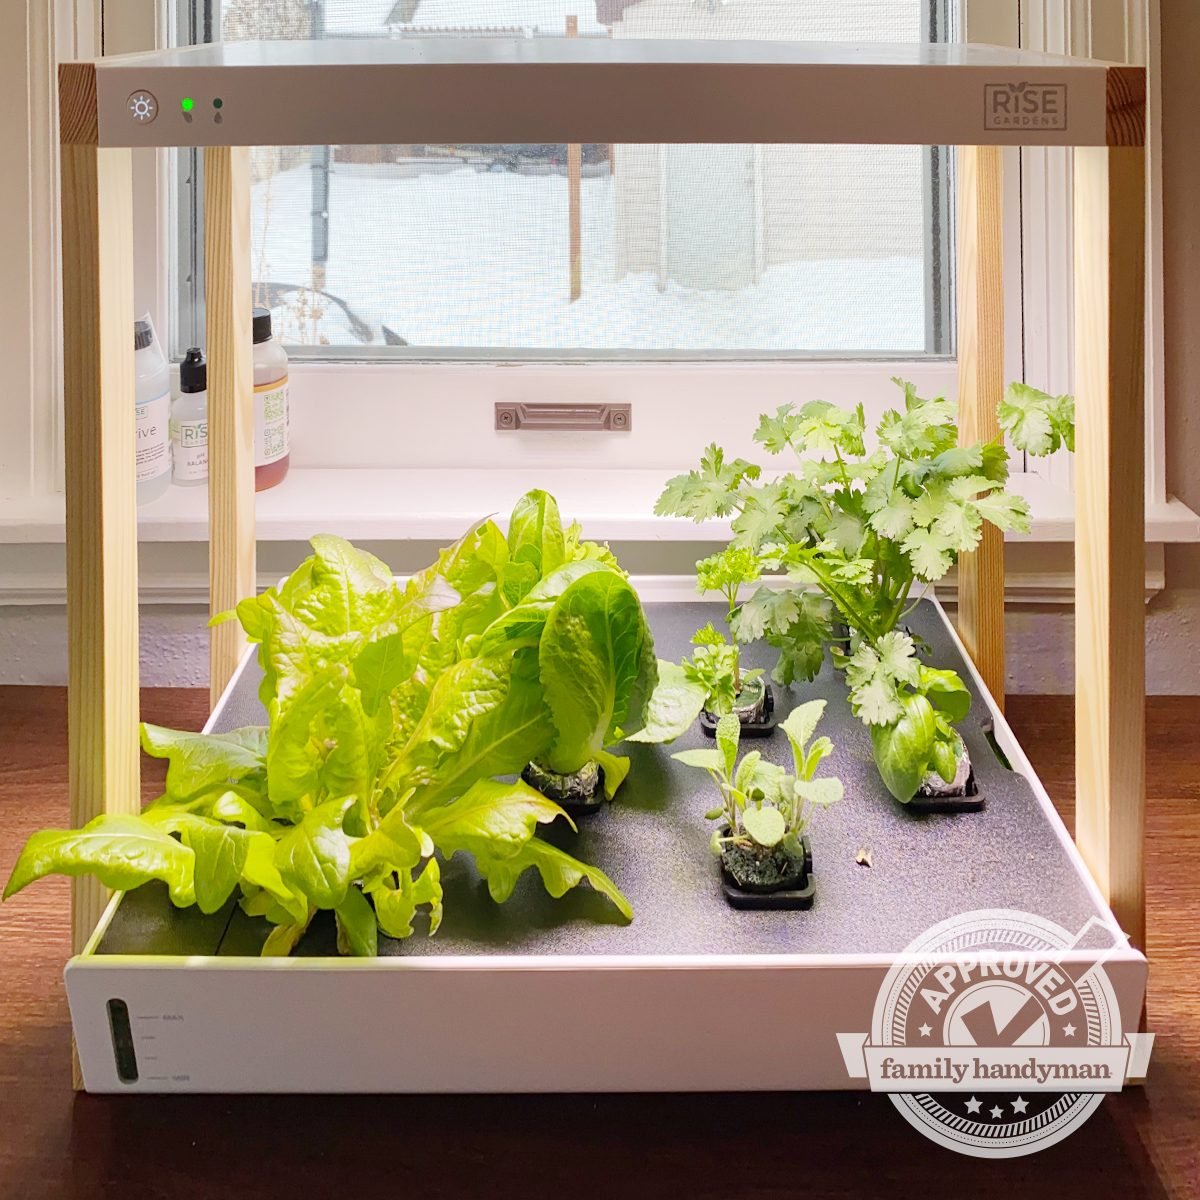 Rise Garden Review: Hydroponic Indoor Garden System (We Approve!)